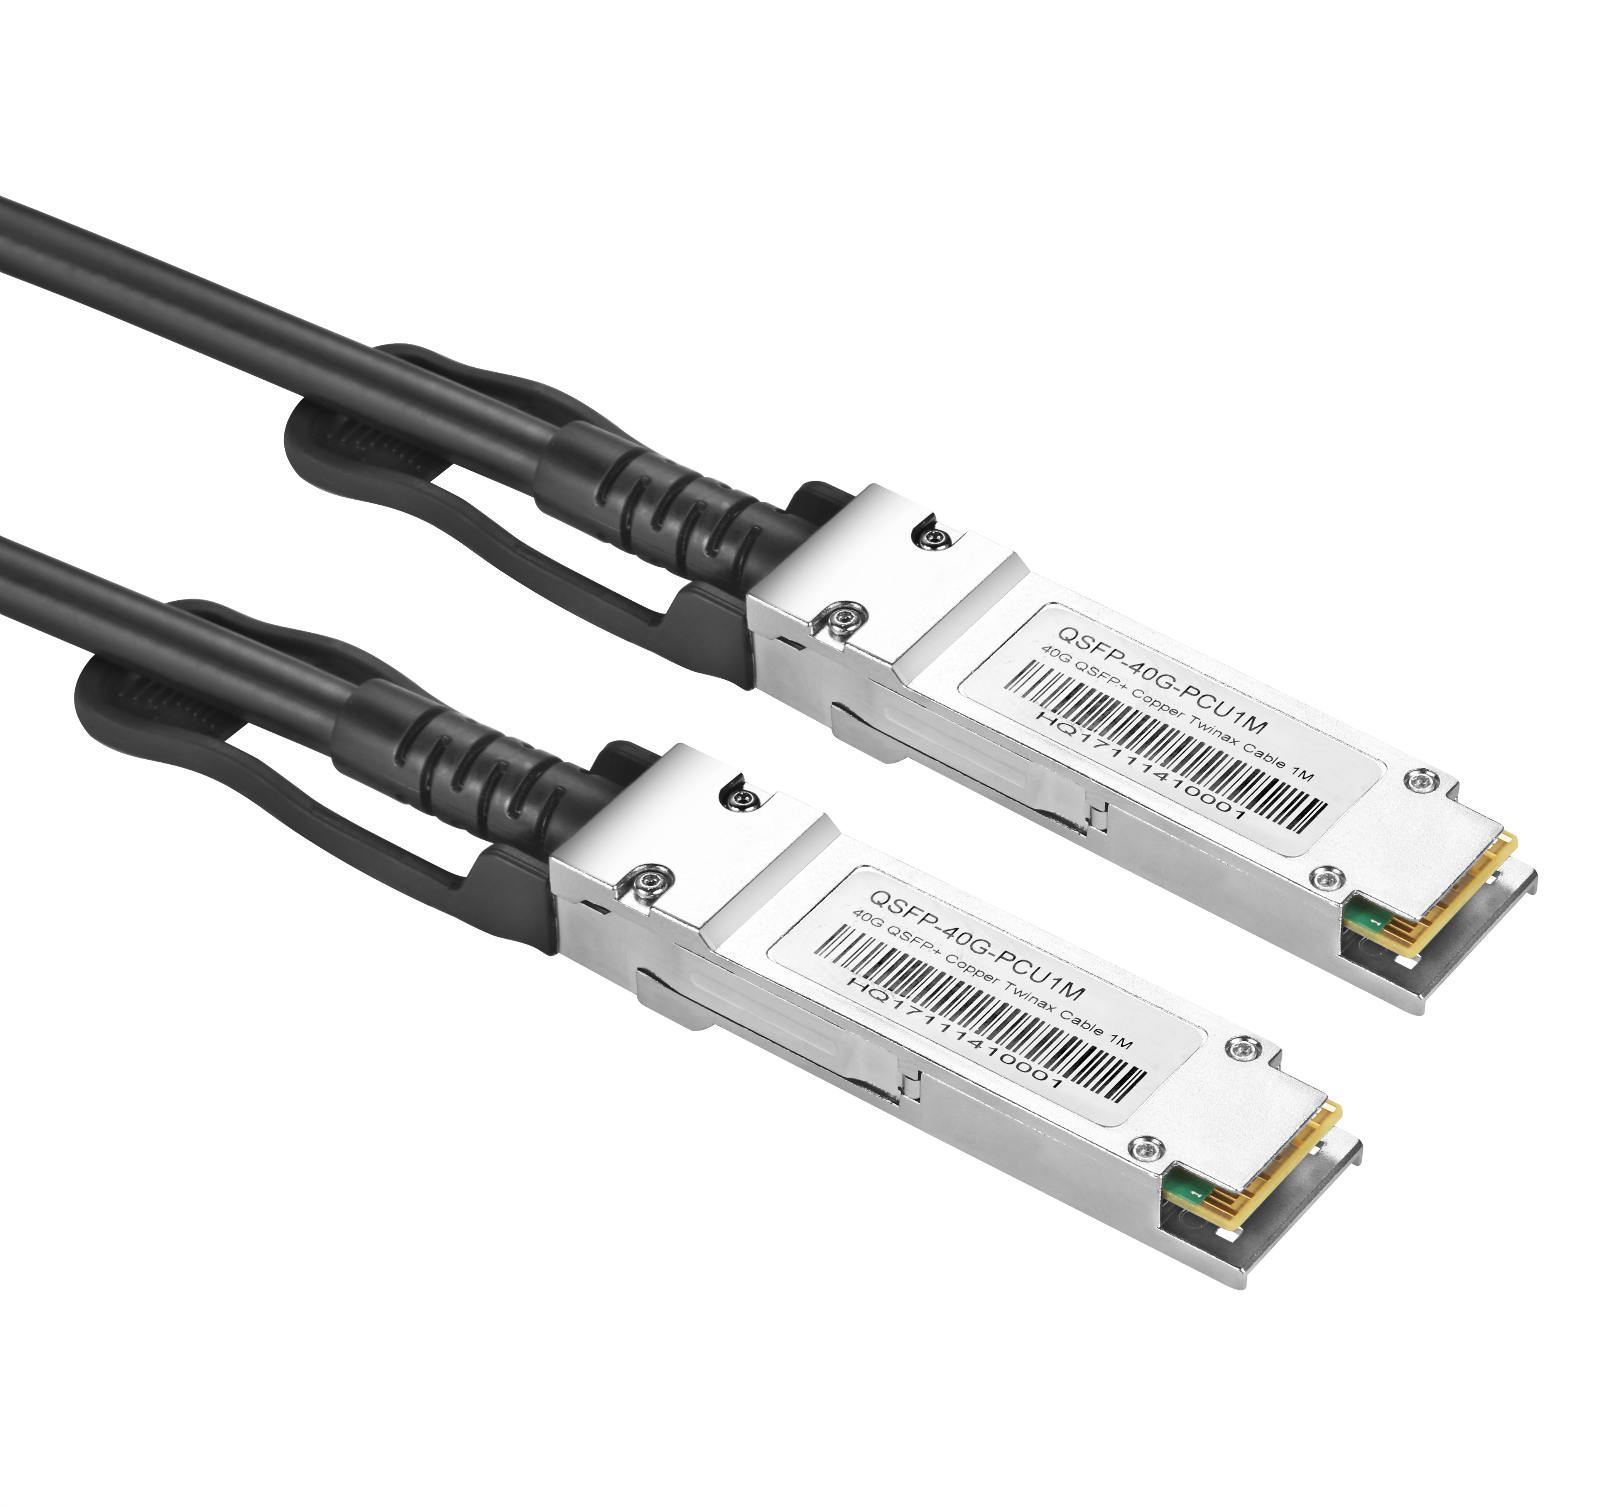 10G SFP DAC choose HTD-InforCable,it specializing in10G SFP